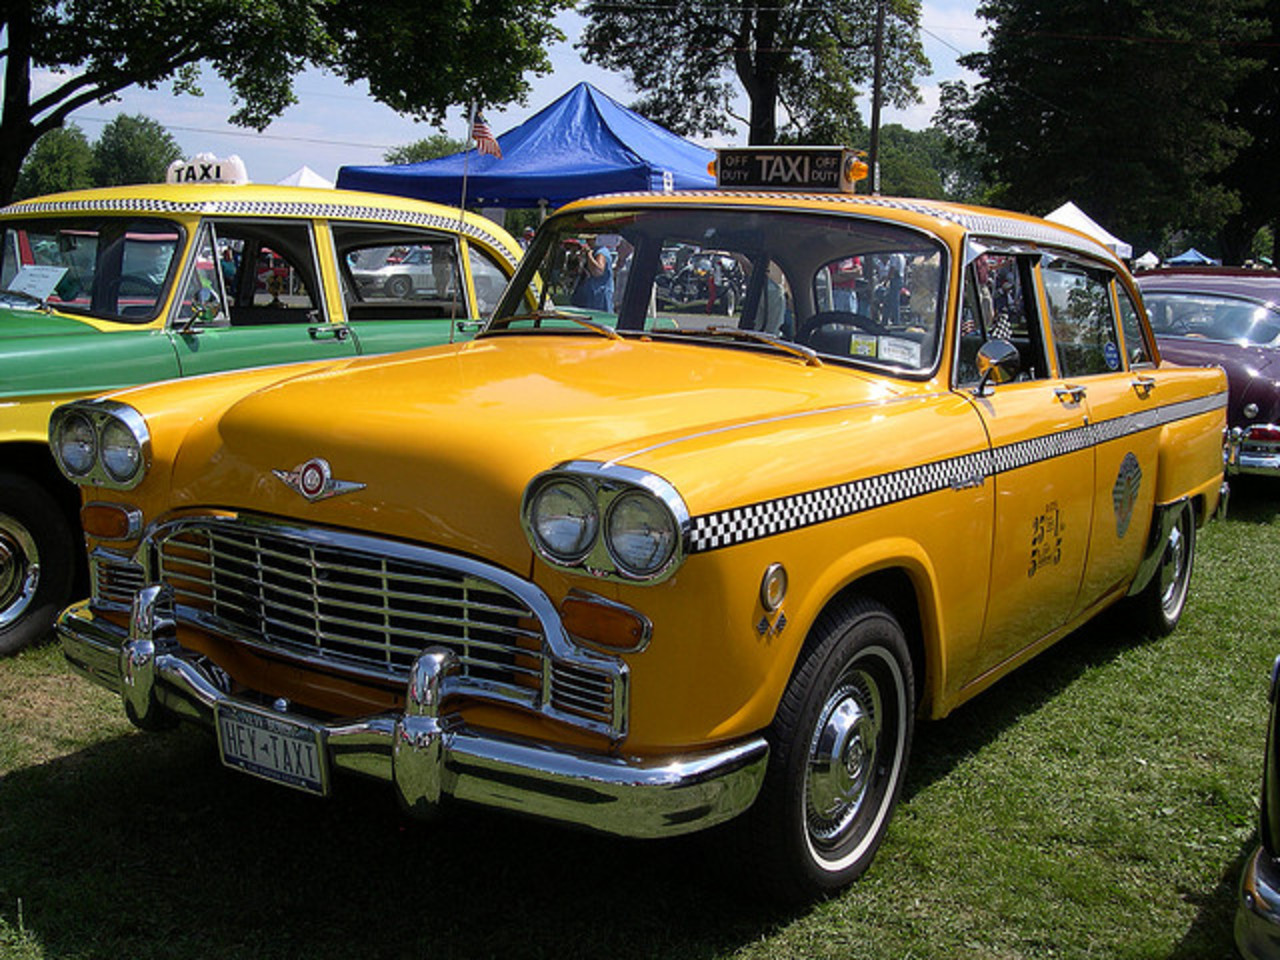 Another Checker Cab | Flickr - Photo Sharing!